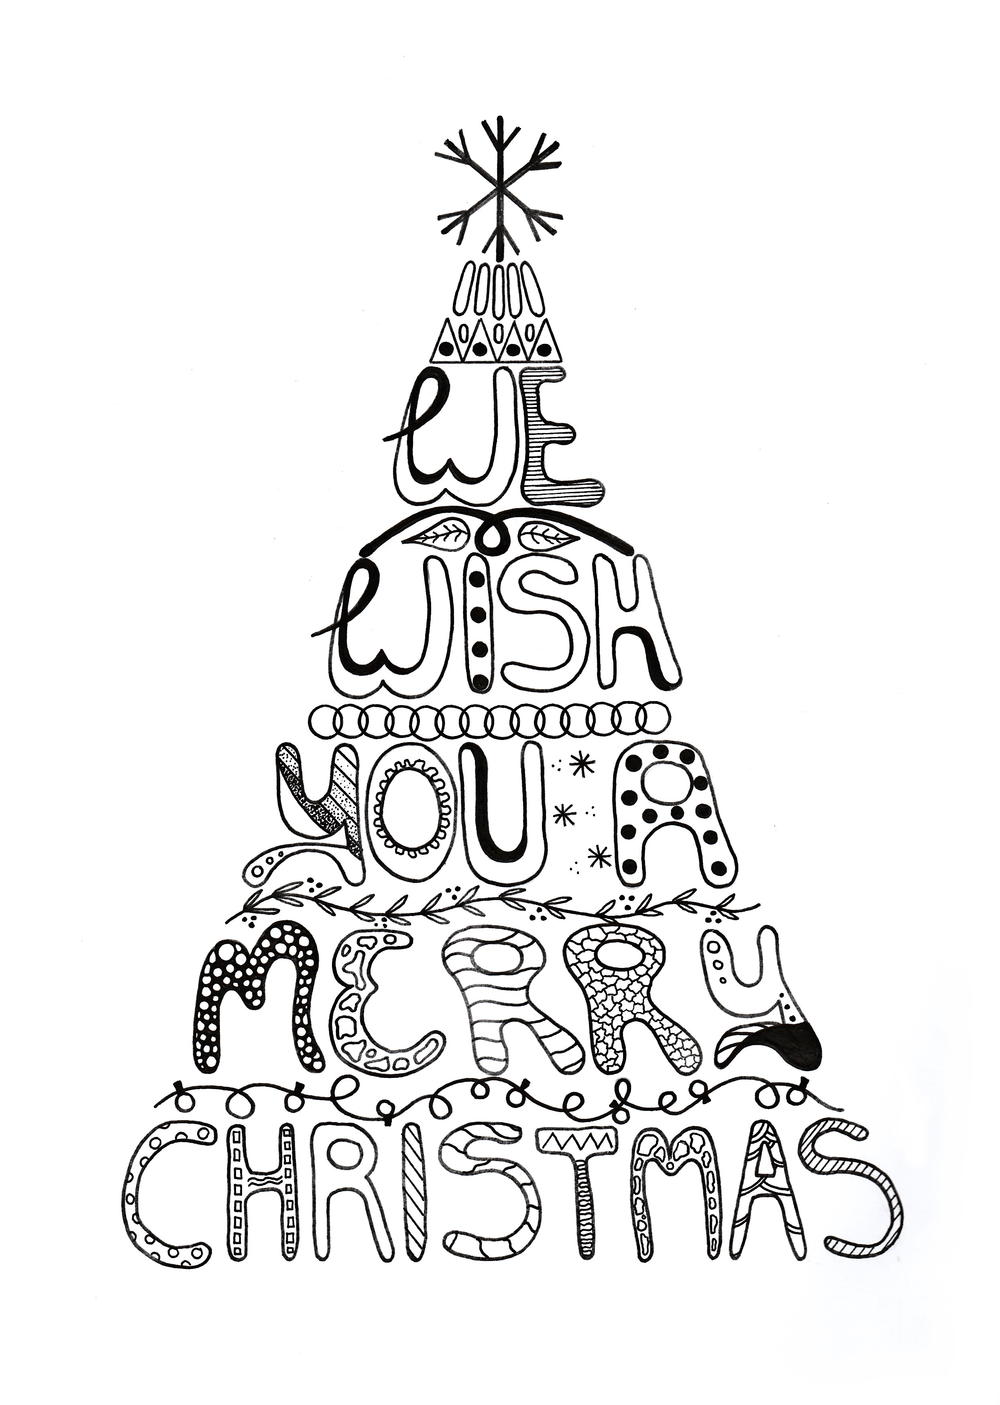 Merry Christmas Adult Coloring Page | AllFreePaperCrafts.com